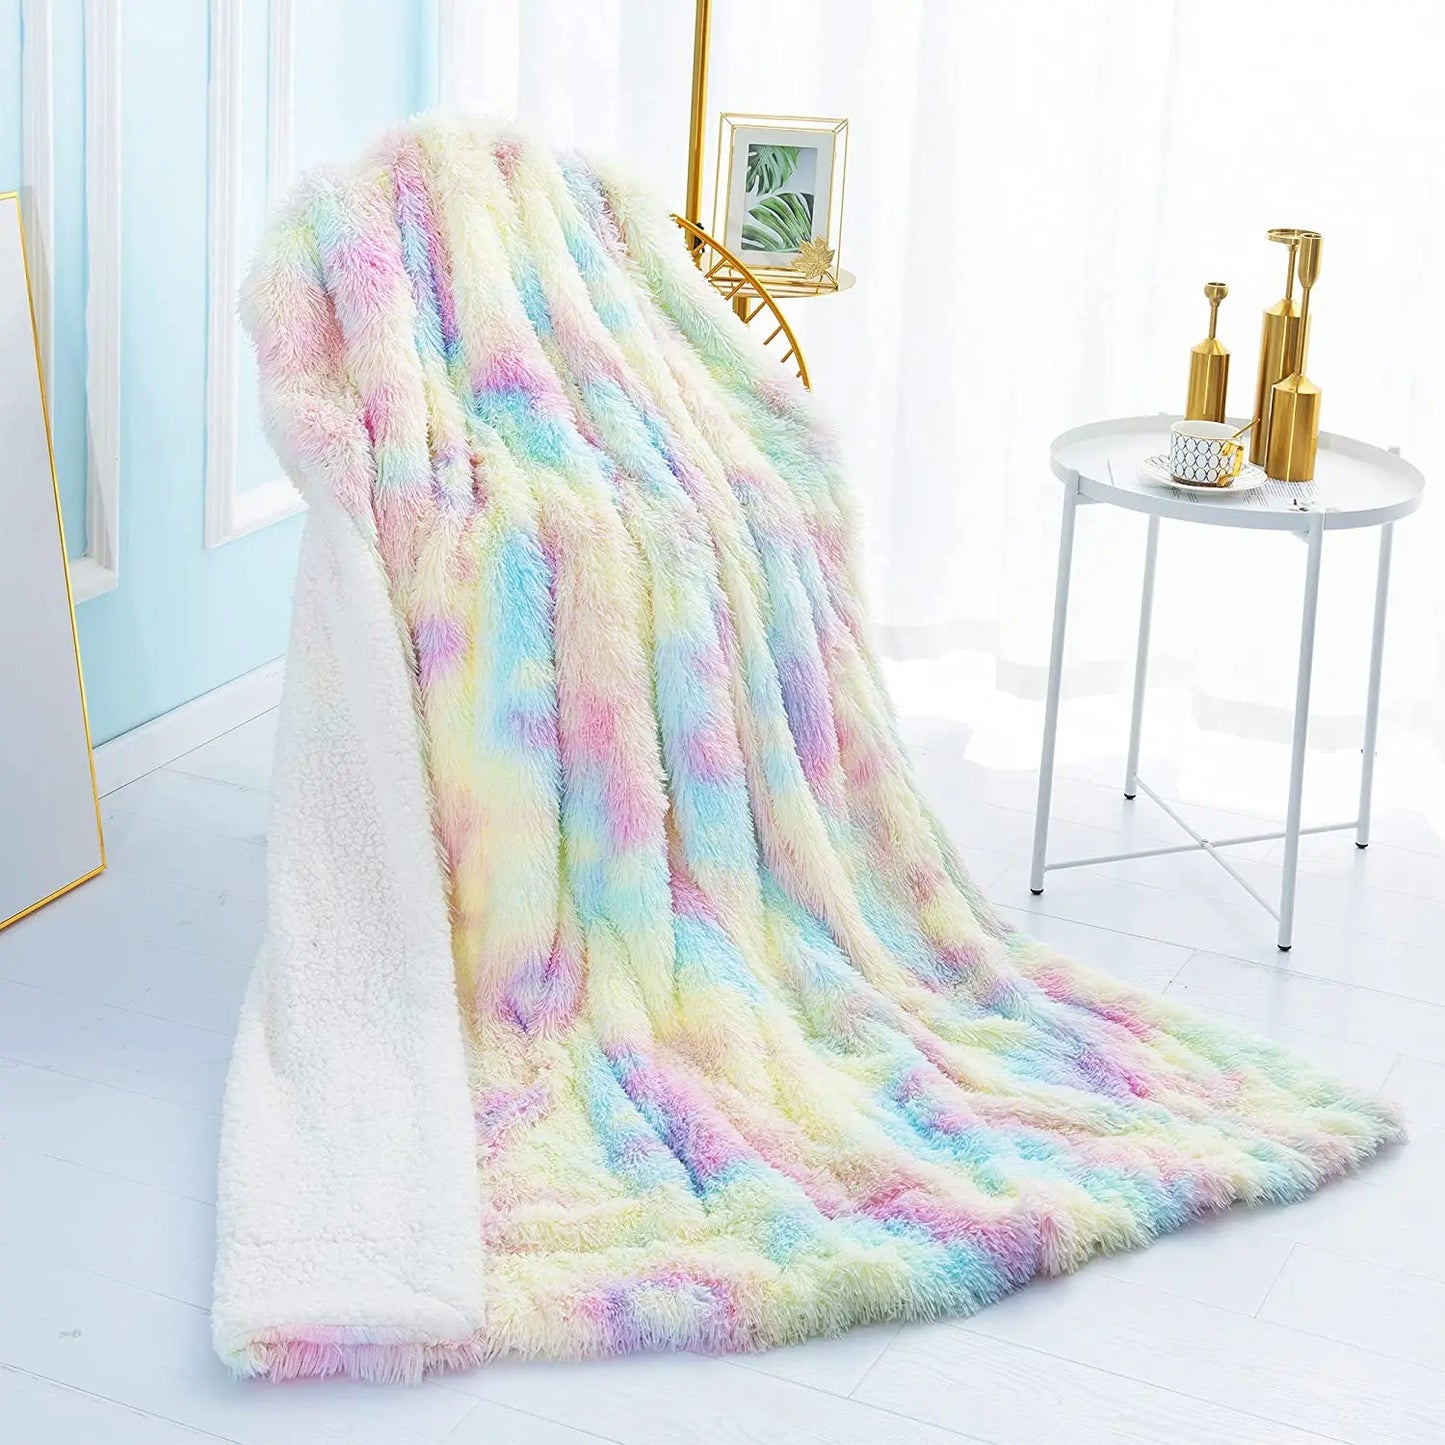 Rainbow Dreams: Soft & Fuzzy Throw Blanket for Girls – Perfect for Couch, Sofa, or Bed! Colourful, Lightweight, & Stylish Room Decor! - Blankets - Zanlana Design and Home Decor